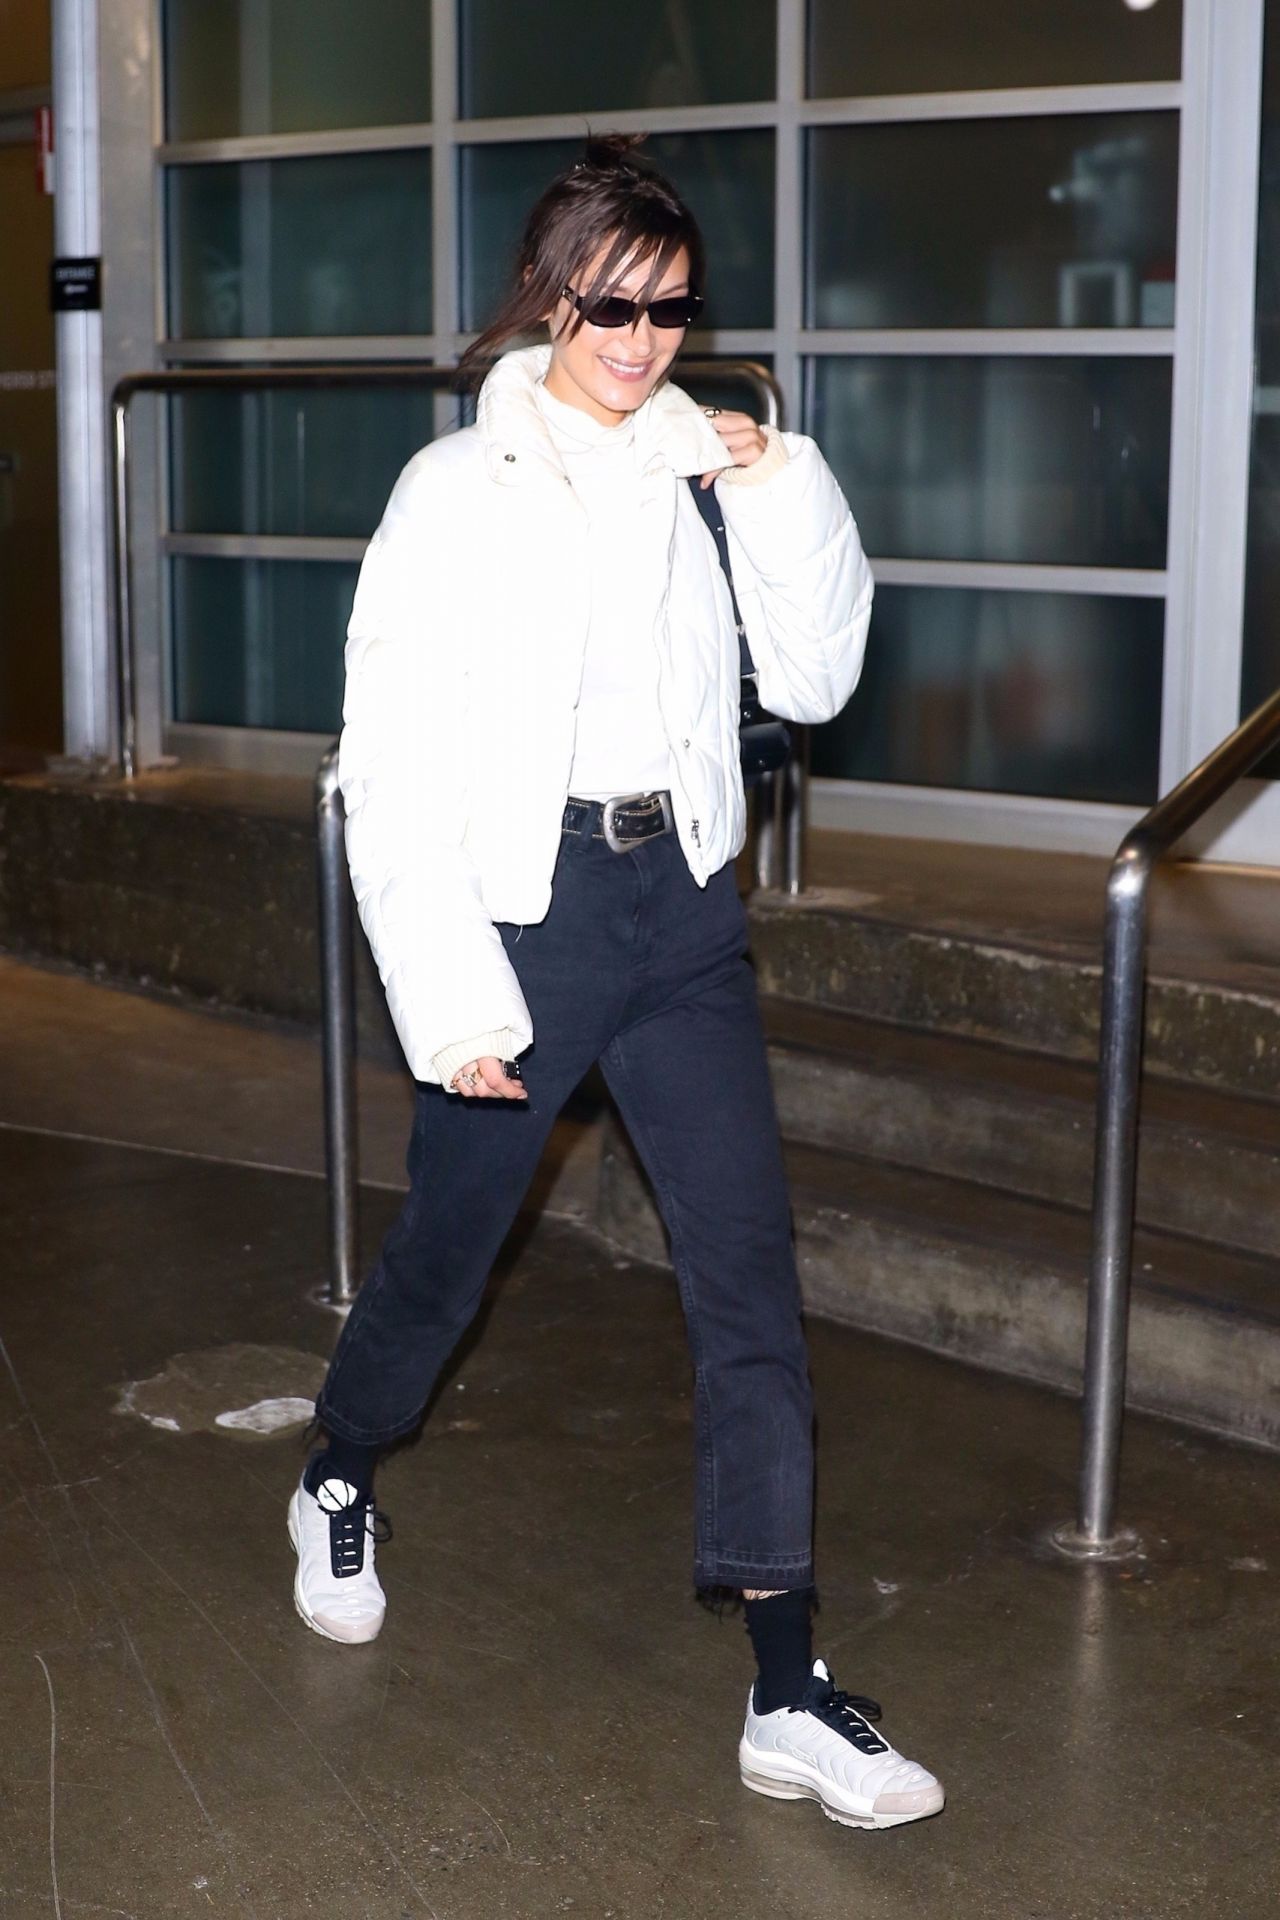 bella-hadid-out-in-nyc-10-22-2018-11.jpg